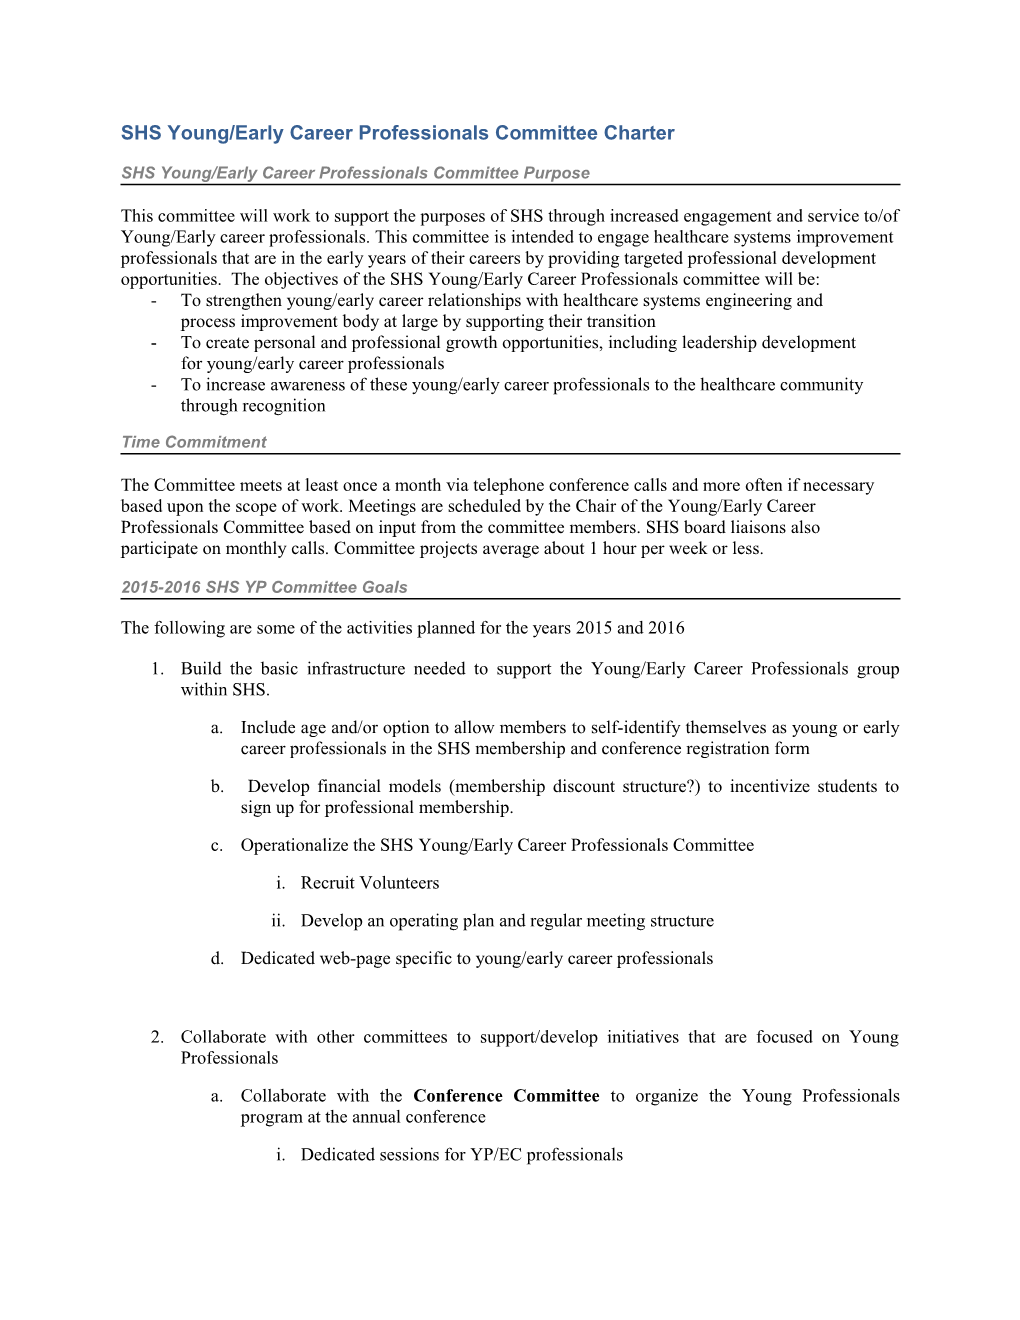 SHS Young/Early Career Professionals Committee Charter